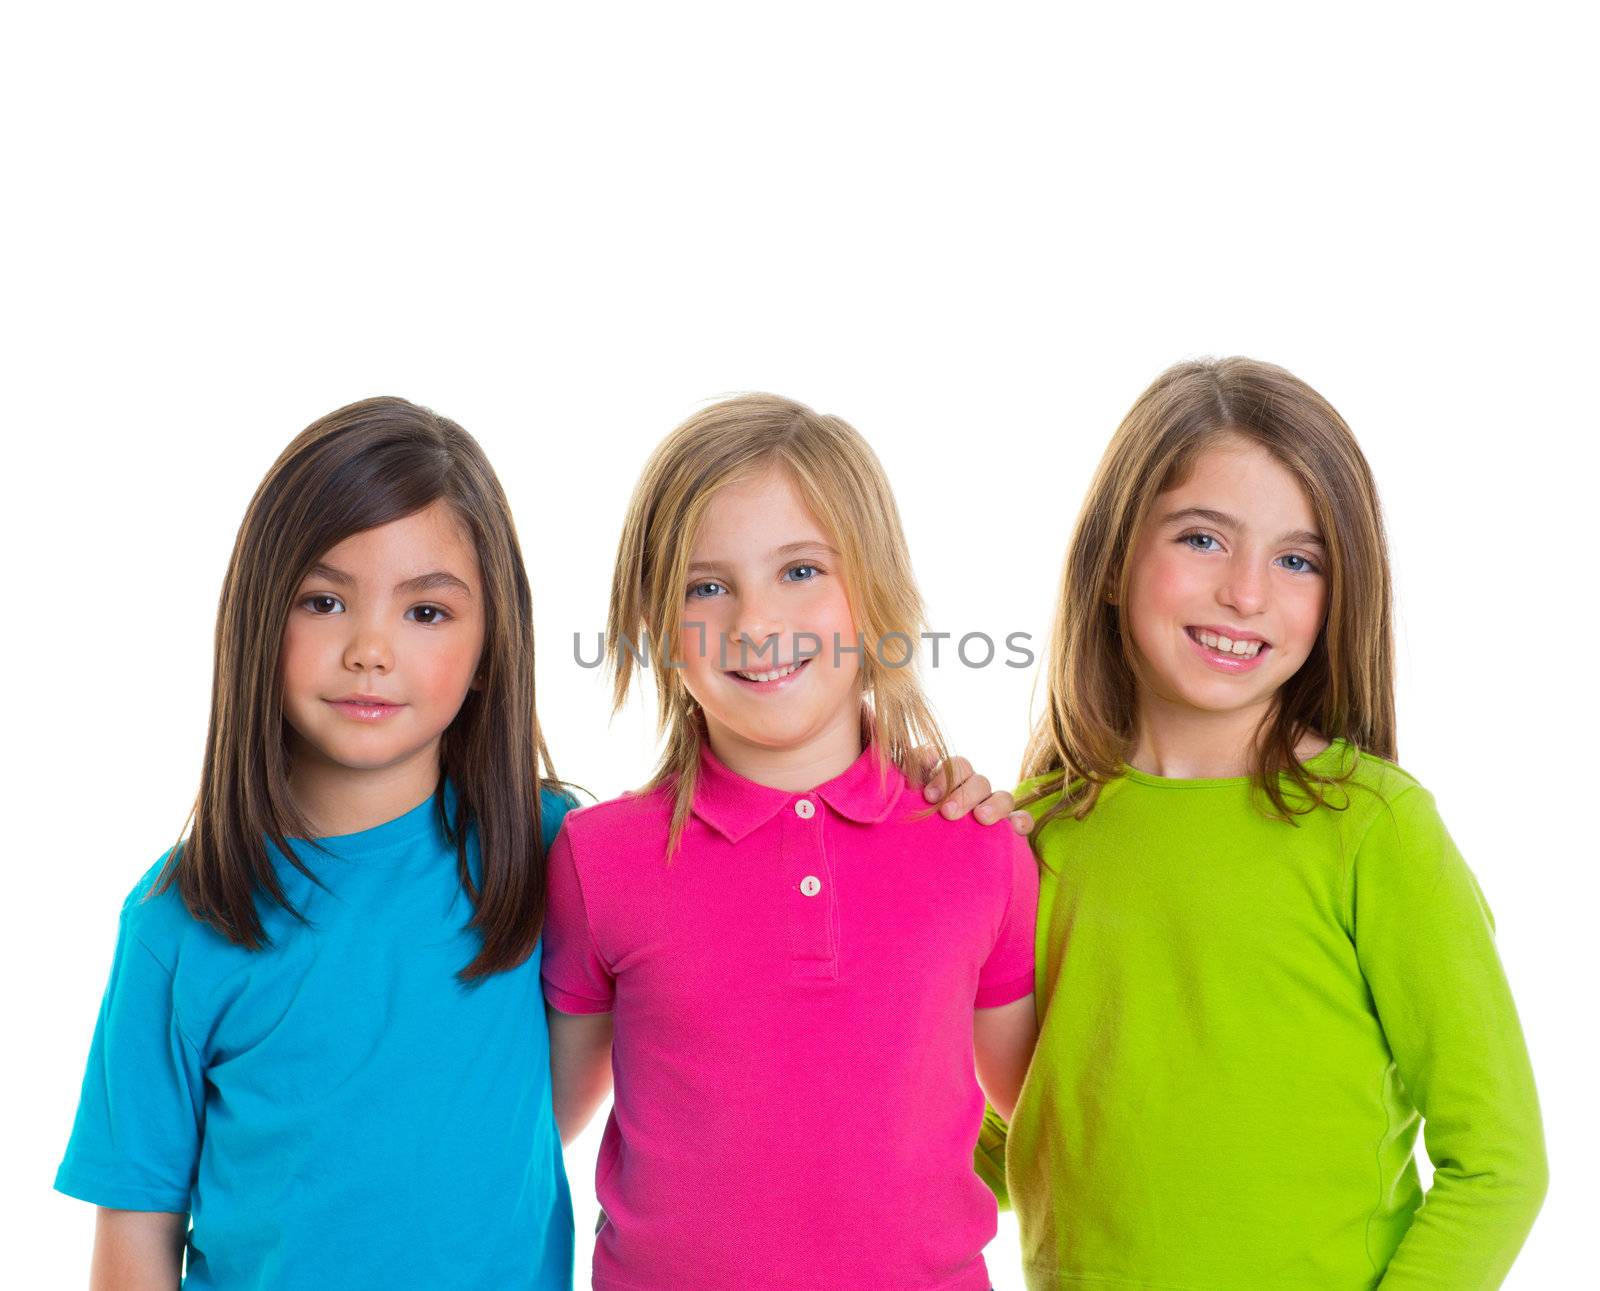 children happy girl firends group smiling hug together isolated on white background